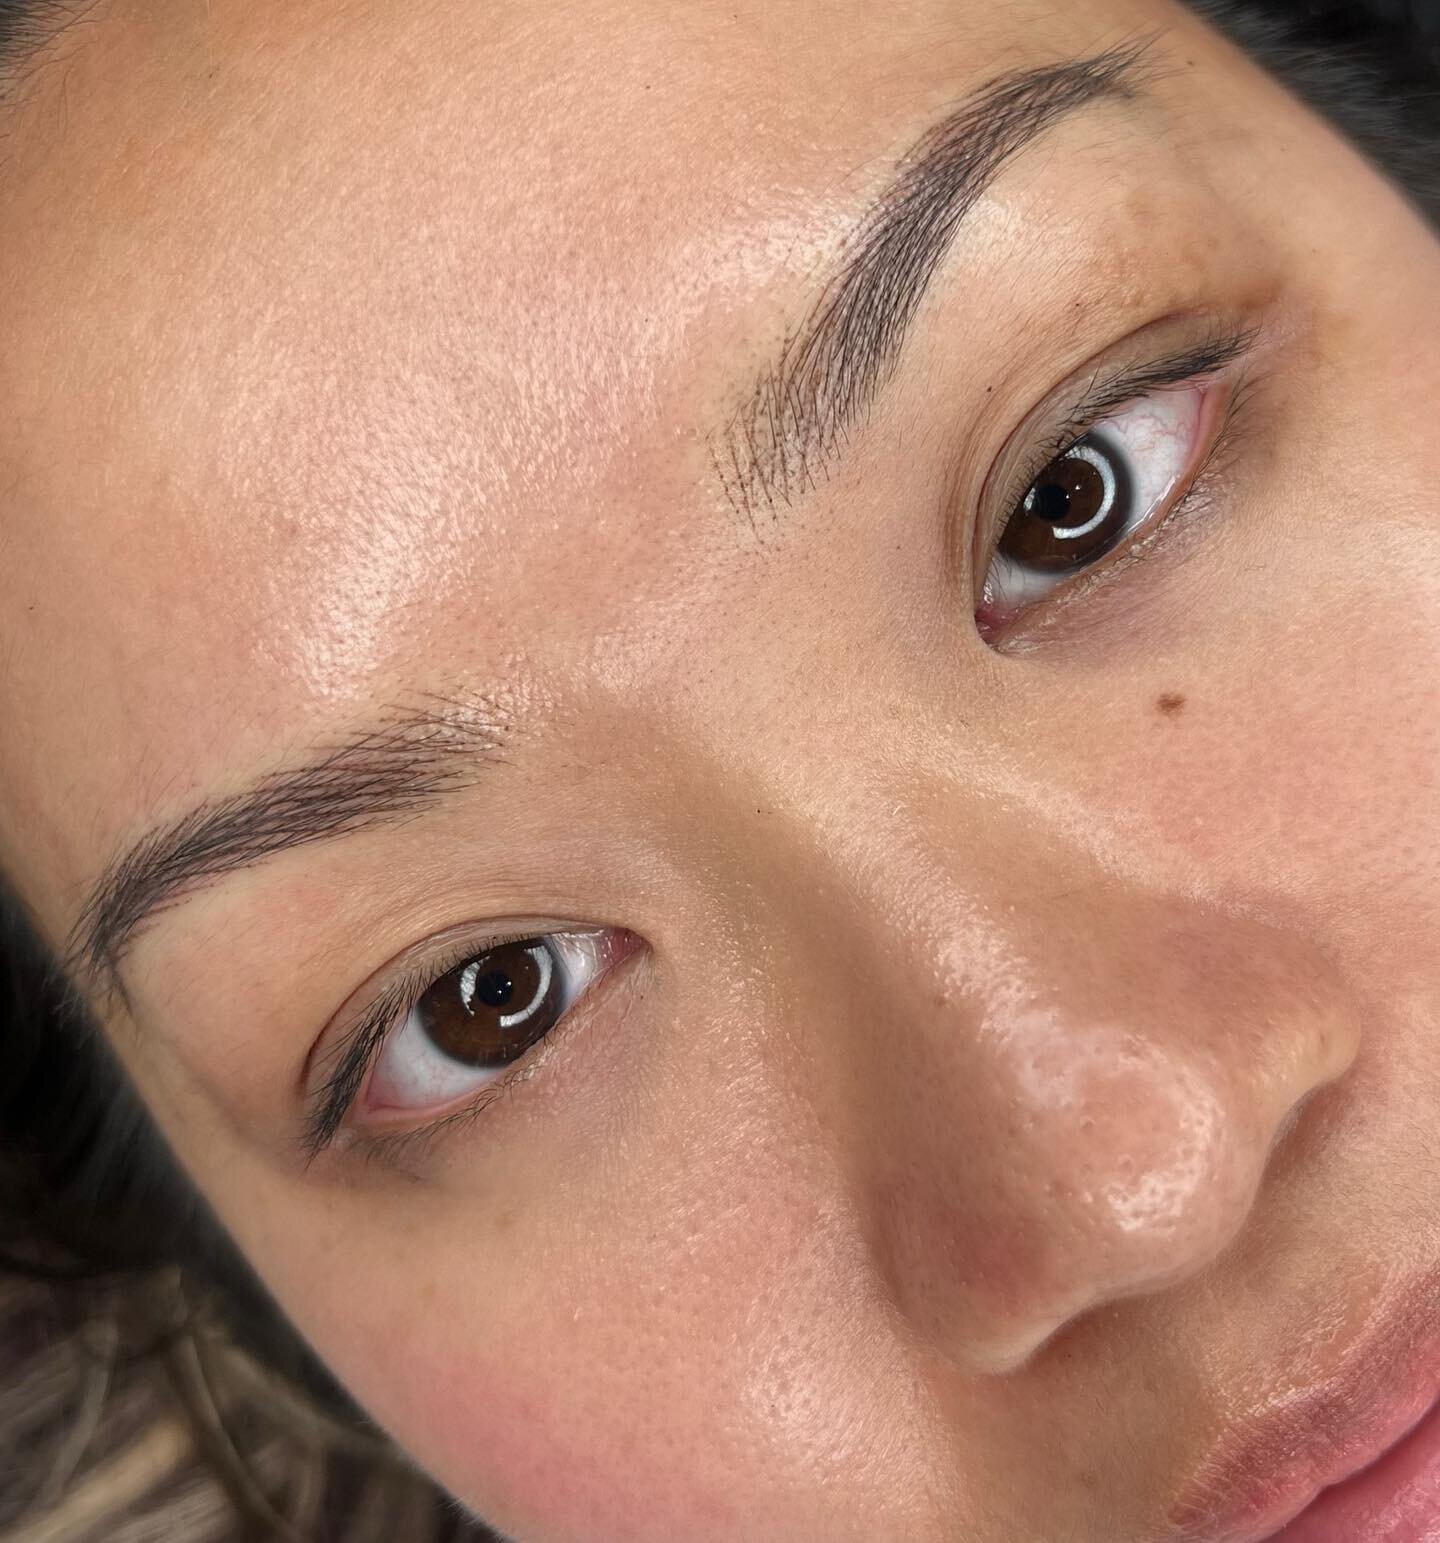 🕰️Are you tired of spending precious time every morning trying to fill in your brows? Do you wish you could wake up with flawless, natural-looking brows? 

🖋️With Nano-Hairstrokes, you can have just that! This innovative PMU technique creates tiny 